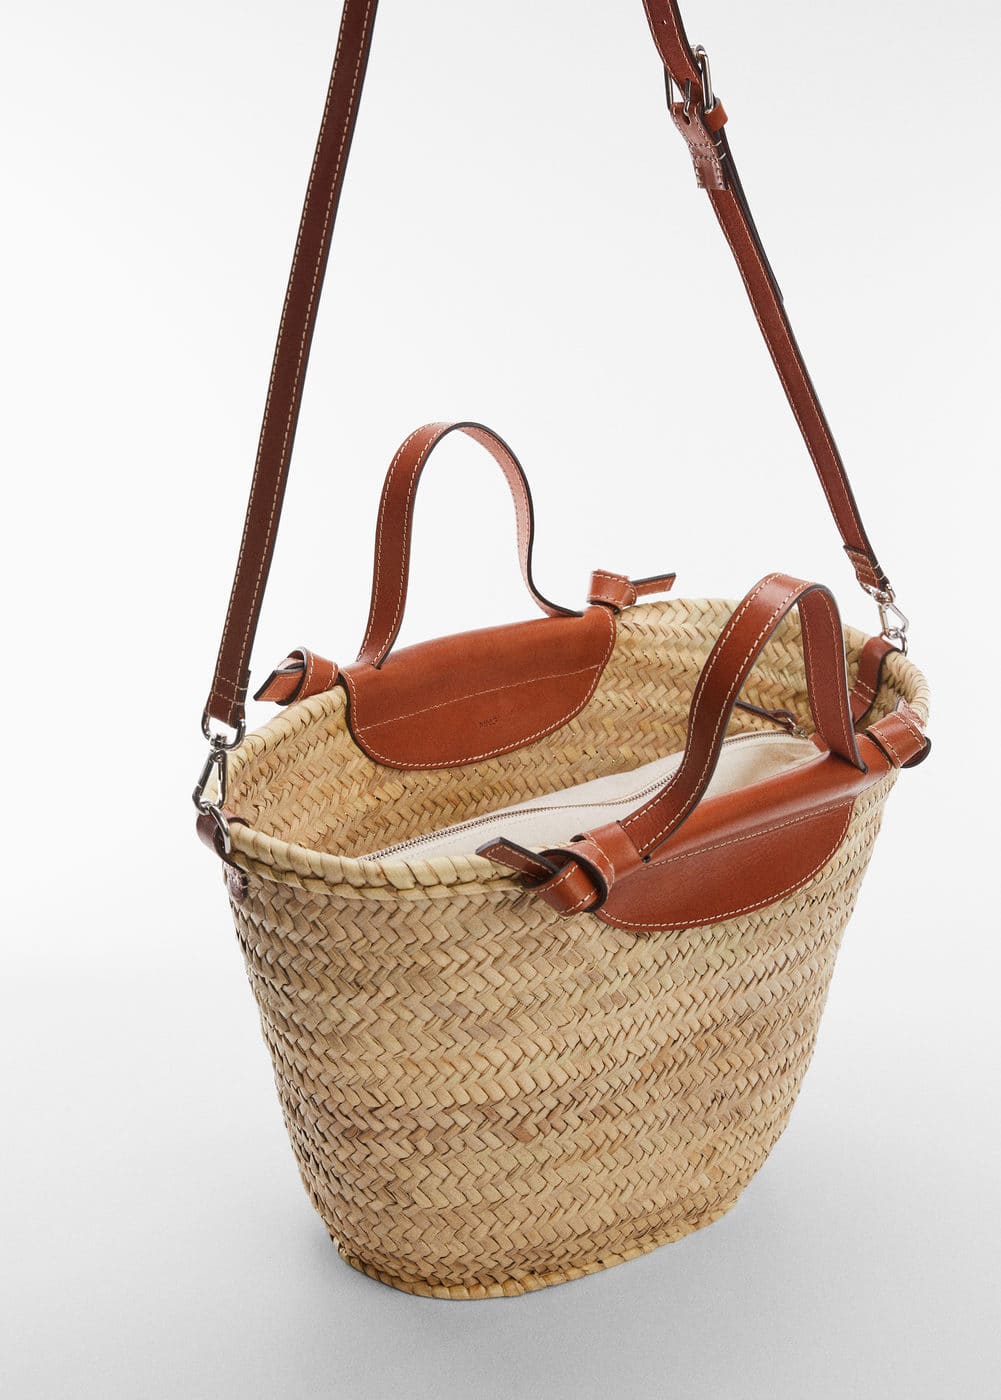 Shop trendy bags for summer: Totes, straw bags and more - Good